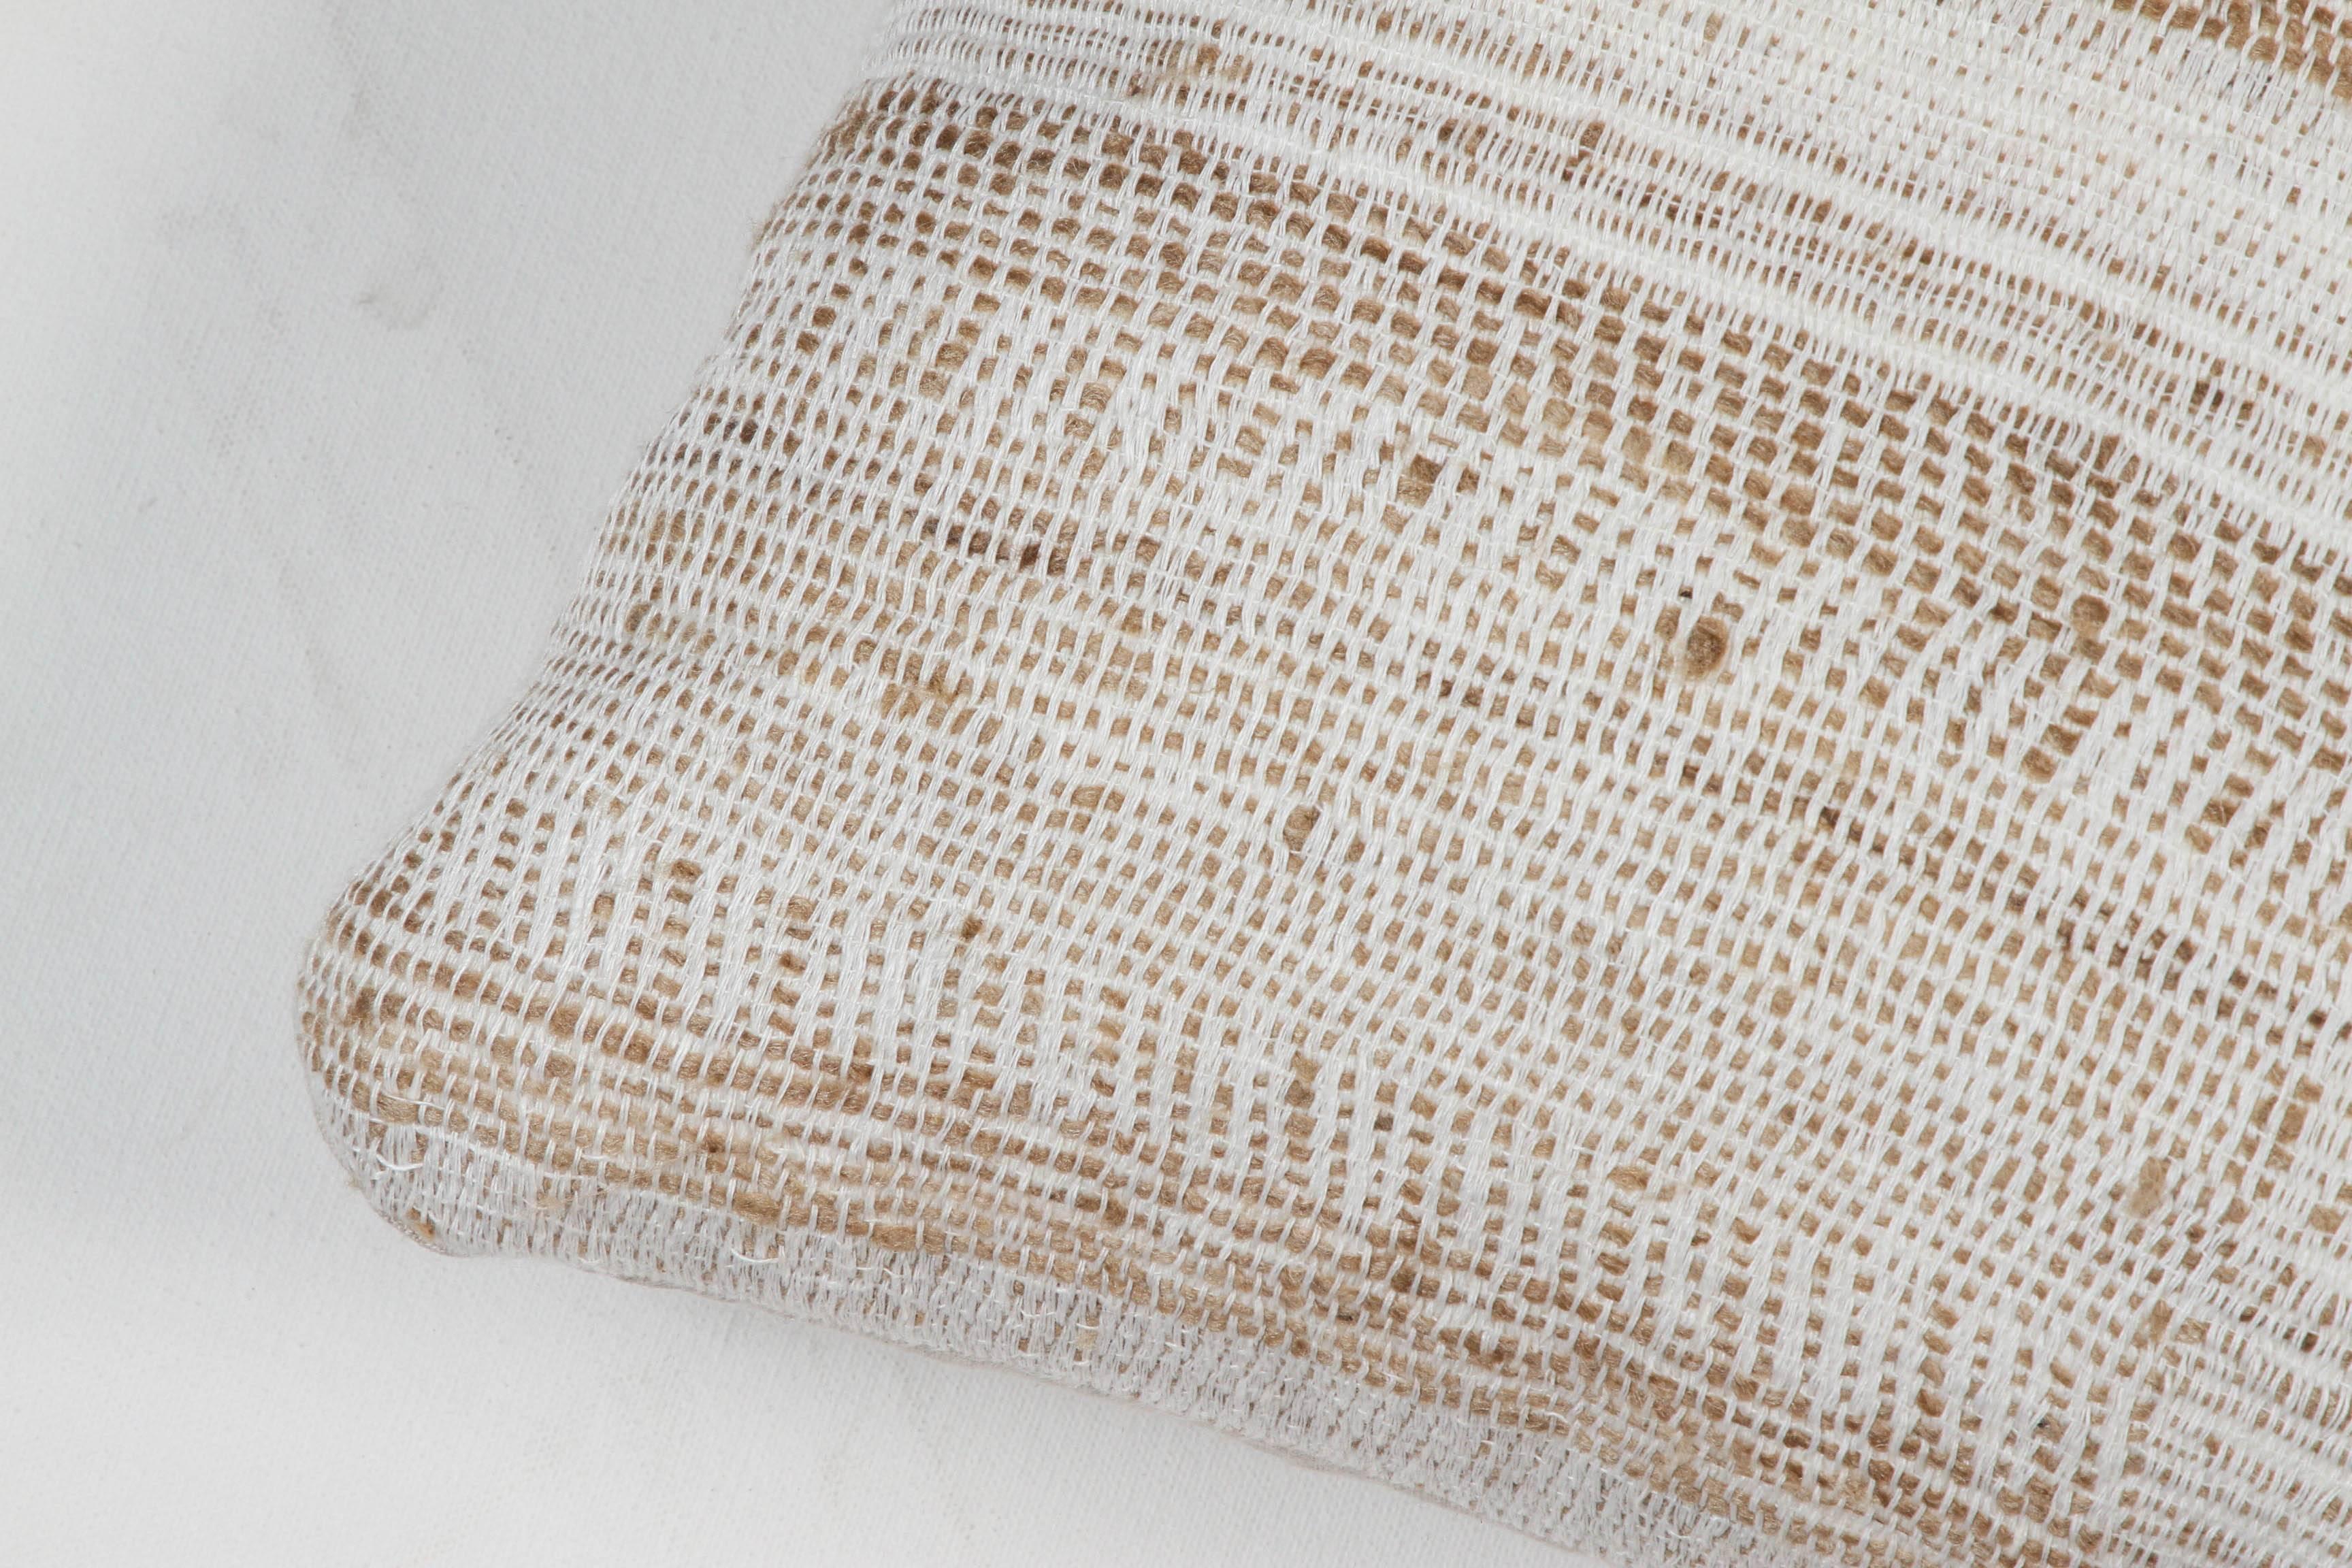 A contemporary line of cushions, pillows, throws, bedcovers, bedspreads and yardage hand woven in India on antique Jacquard looms. Handspun wool, cotton, linen, and raw silk give the textiles an appealing uneven quality.

This wool and raw tussar